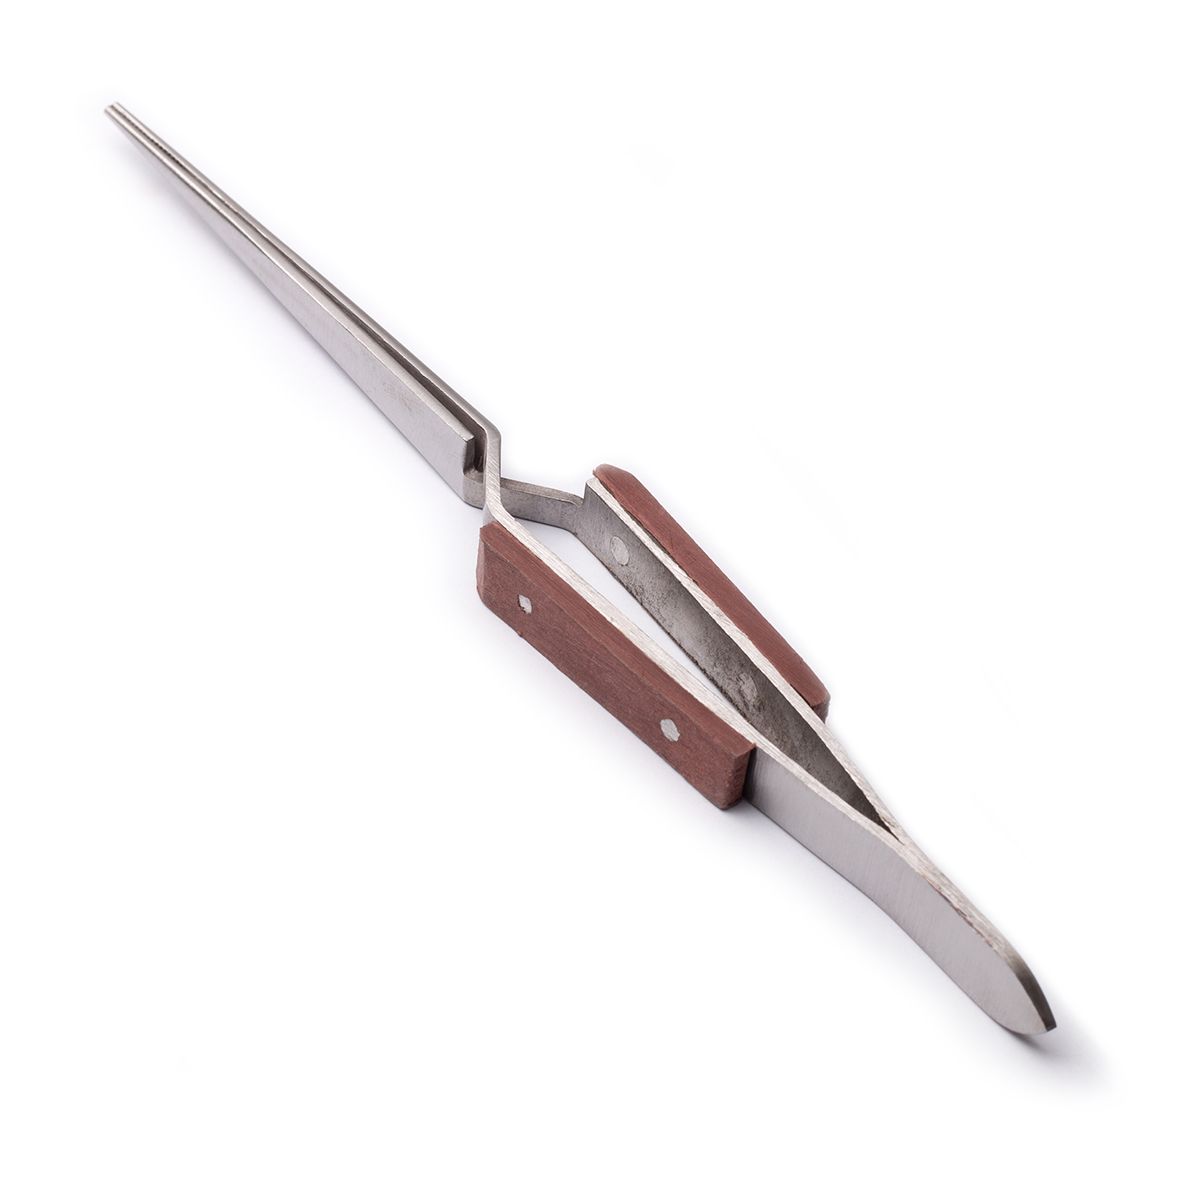 High Quality watch tweezer Available Online Now 